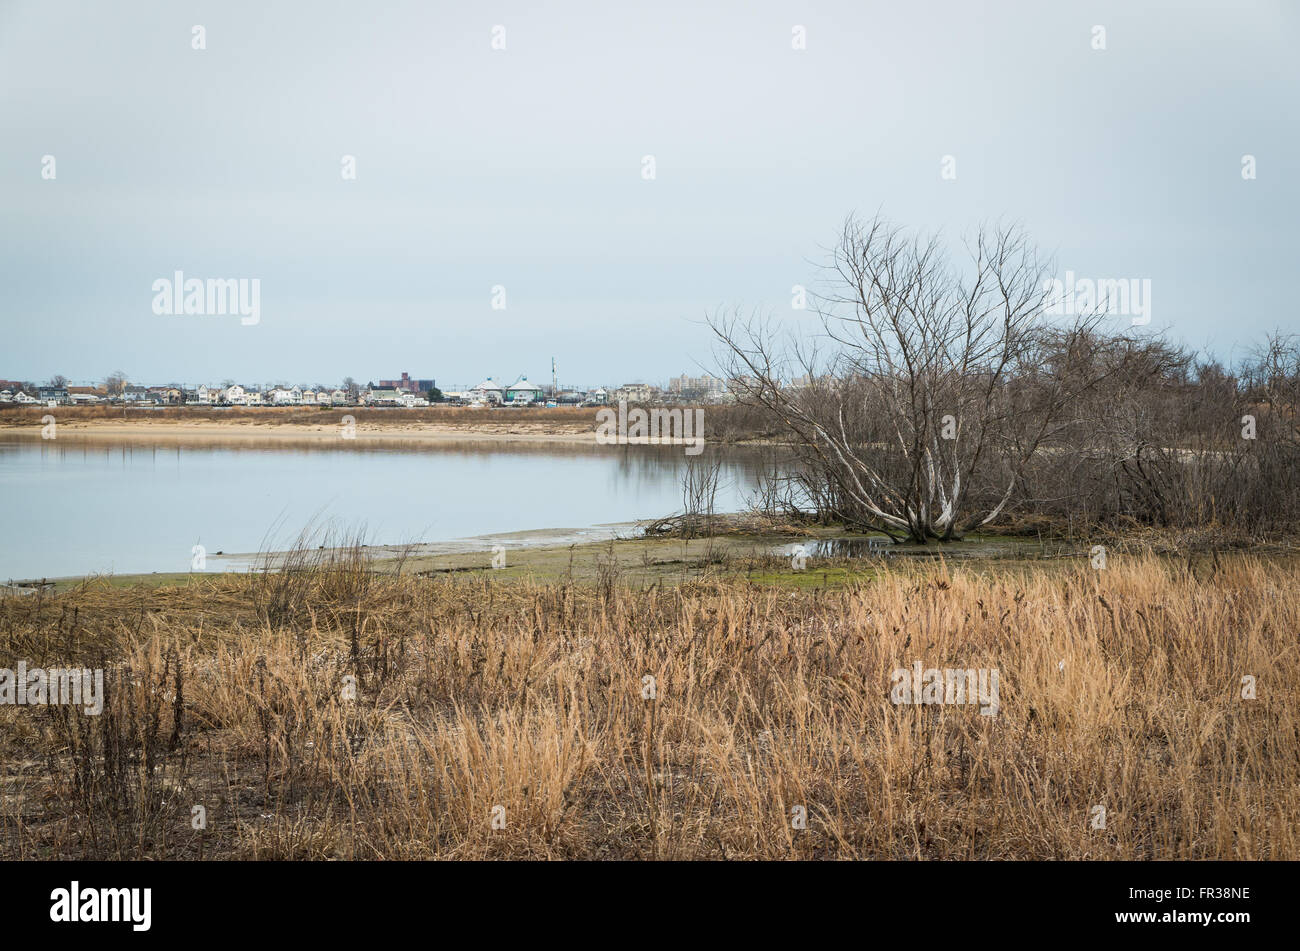 View across the West Pond at Jamaica Bay Wildlife Refuge towards Broad Channel, a waterside suburban town in Queens, New York Stock Photo